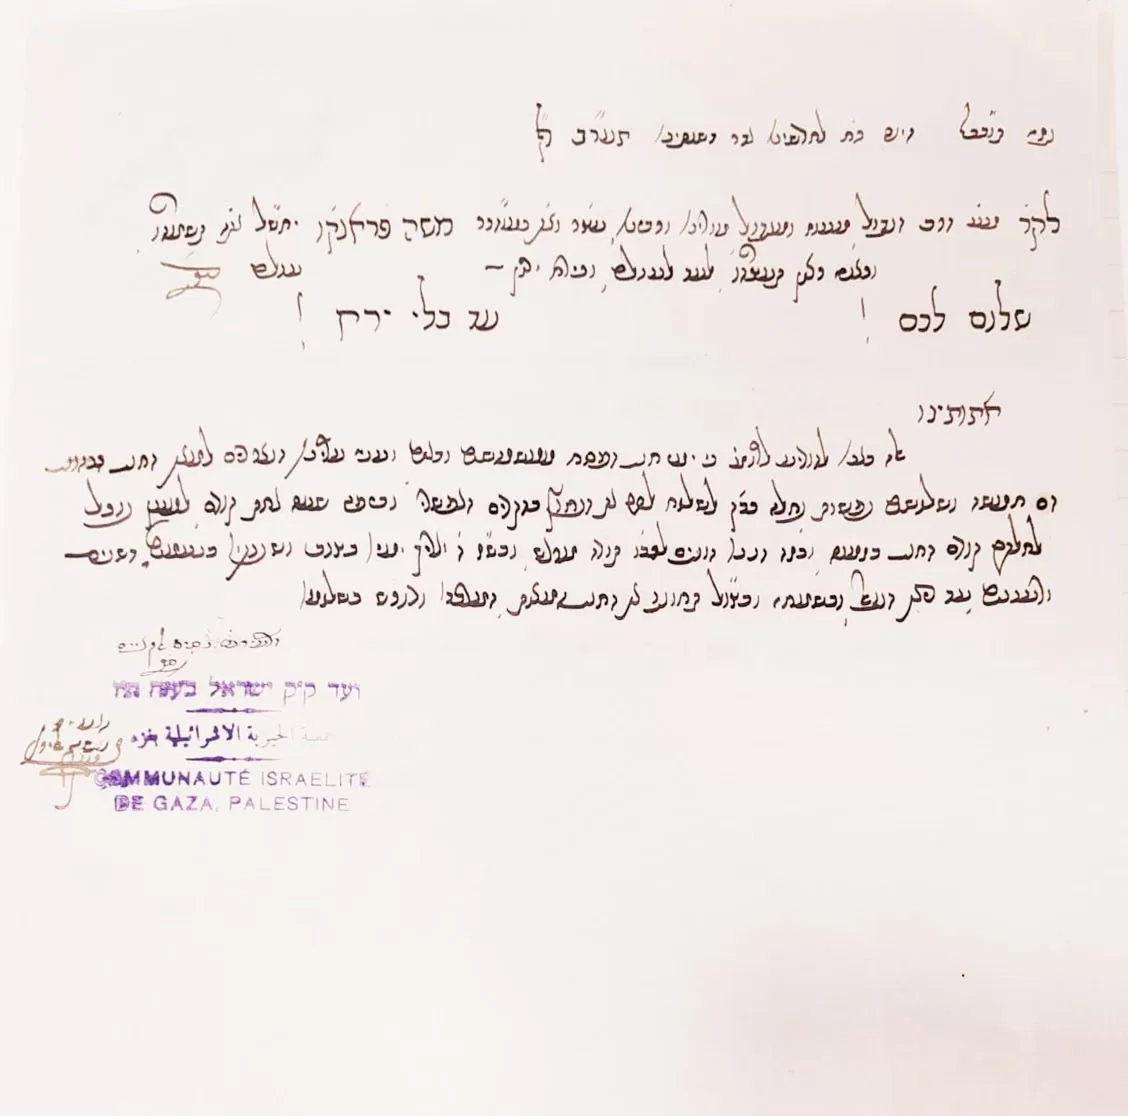 A letter from the Jewish community in Gaza to Chief Rabbi Franco, 1912. From the Moshe David Gaon Archive, which is in the process of being cataloged thanks to the kind donation of the Samis Foundation, Seattle, Washington